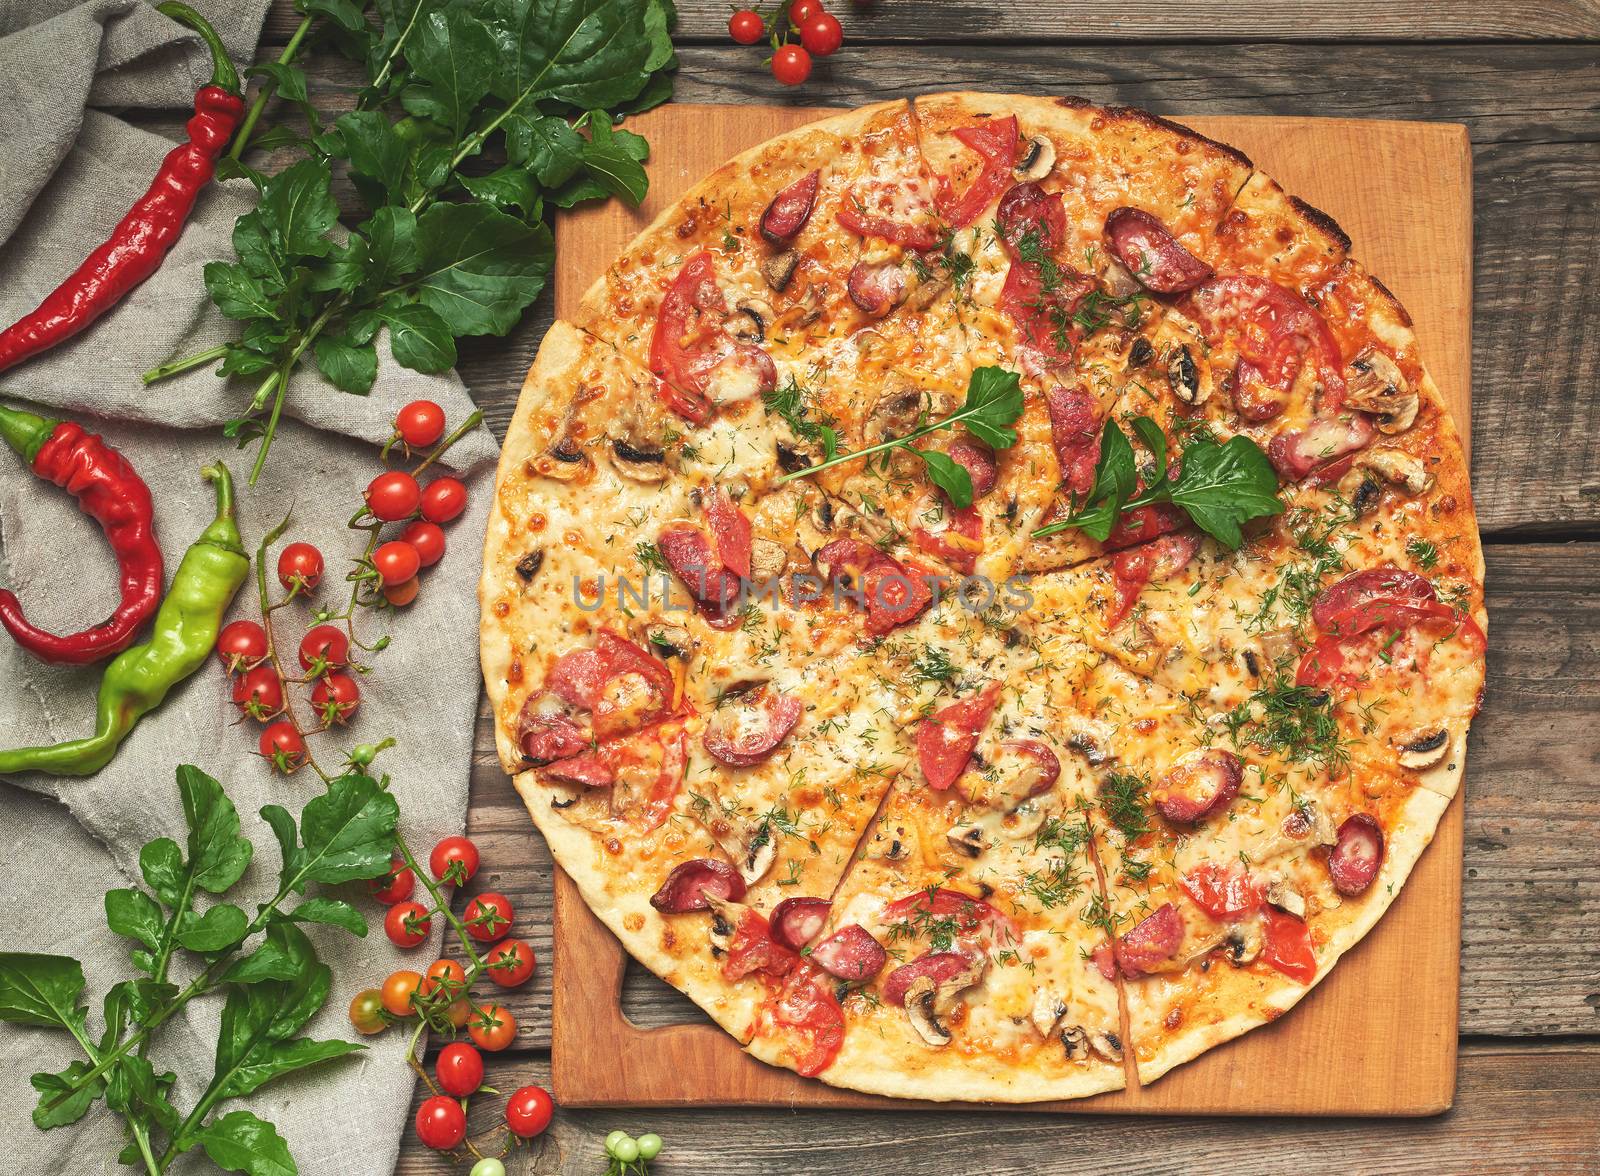 baked round pizza with smoked sausages, mushrooms, tomatoes by ndanko